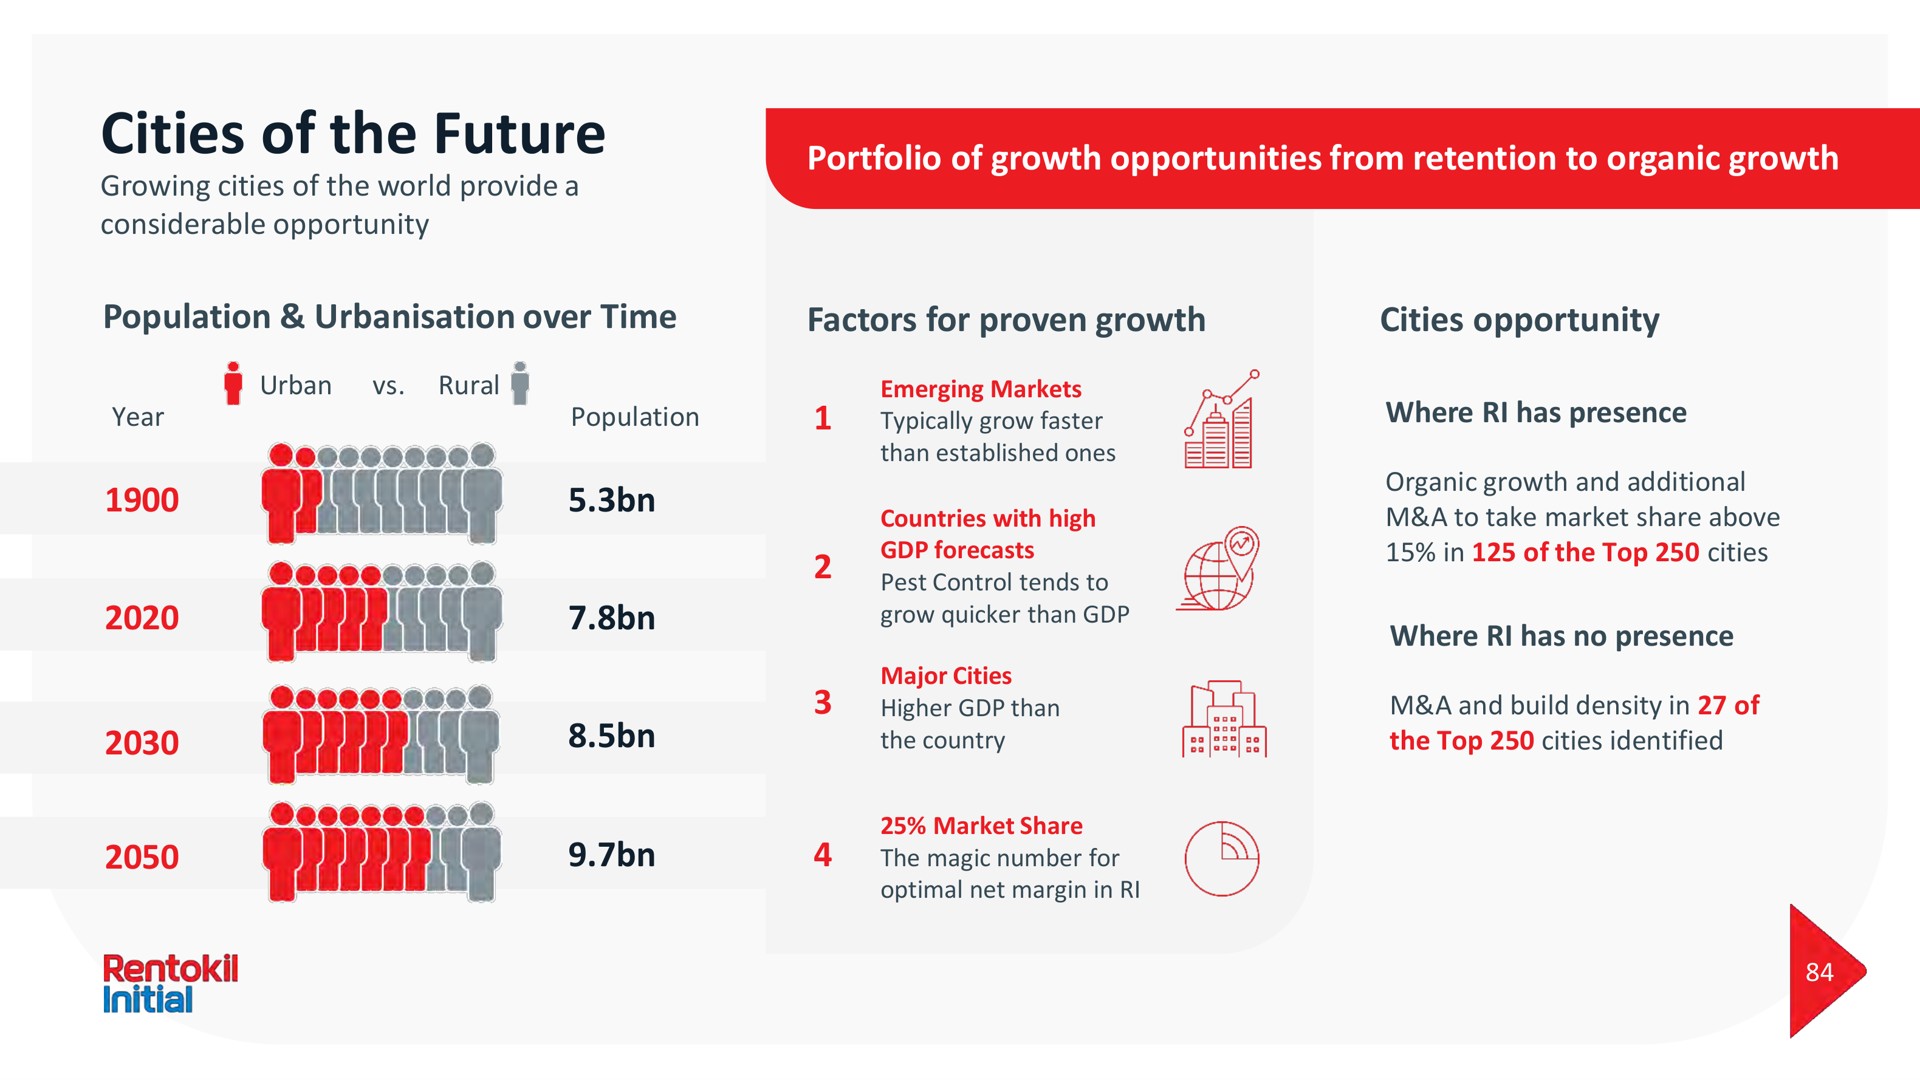 cities of the future portfolio of growth opportunities from retention to organic growth population over time factors for proven growth cities opportunity | Rentokil Initial